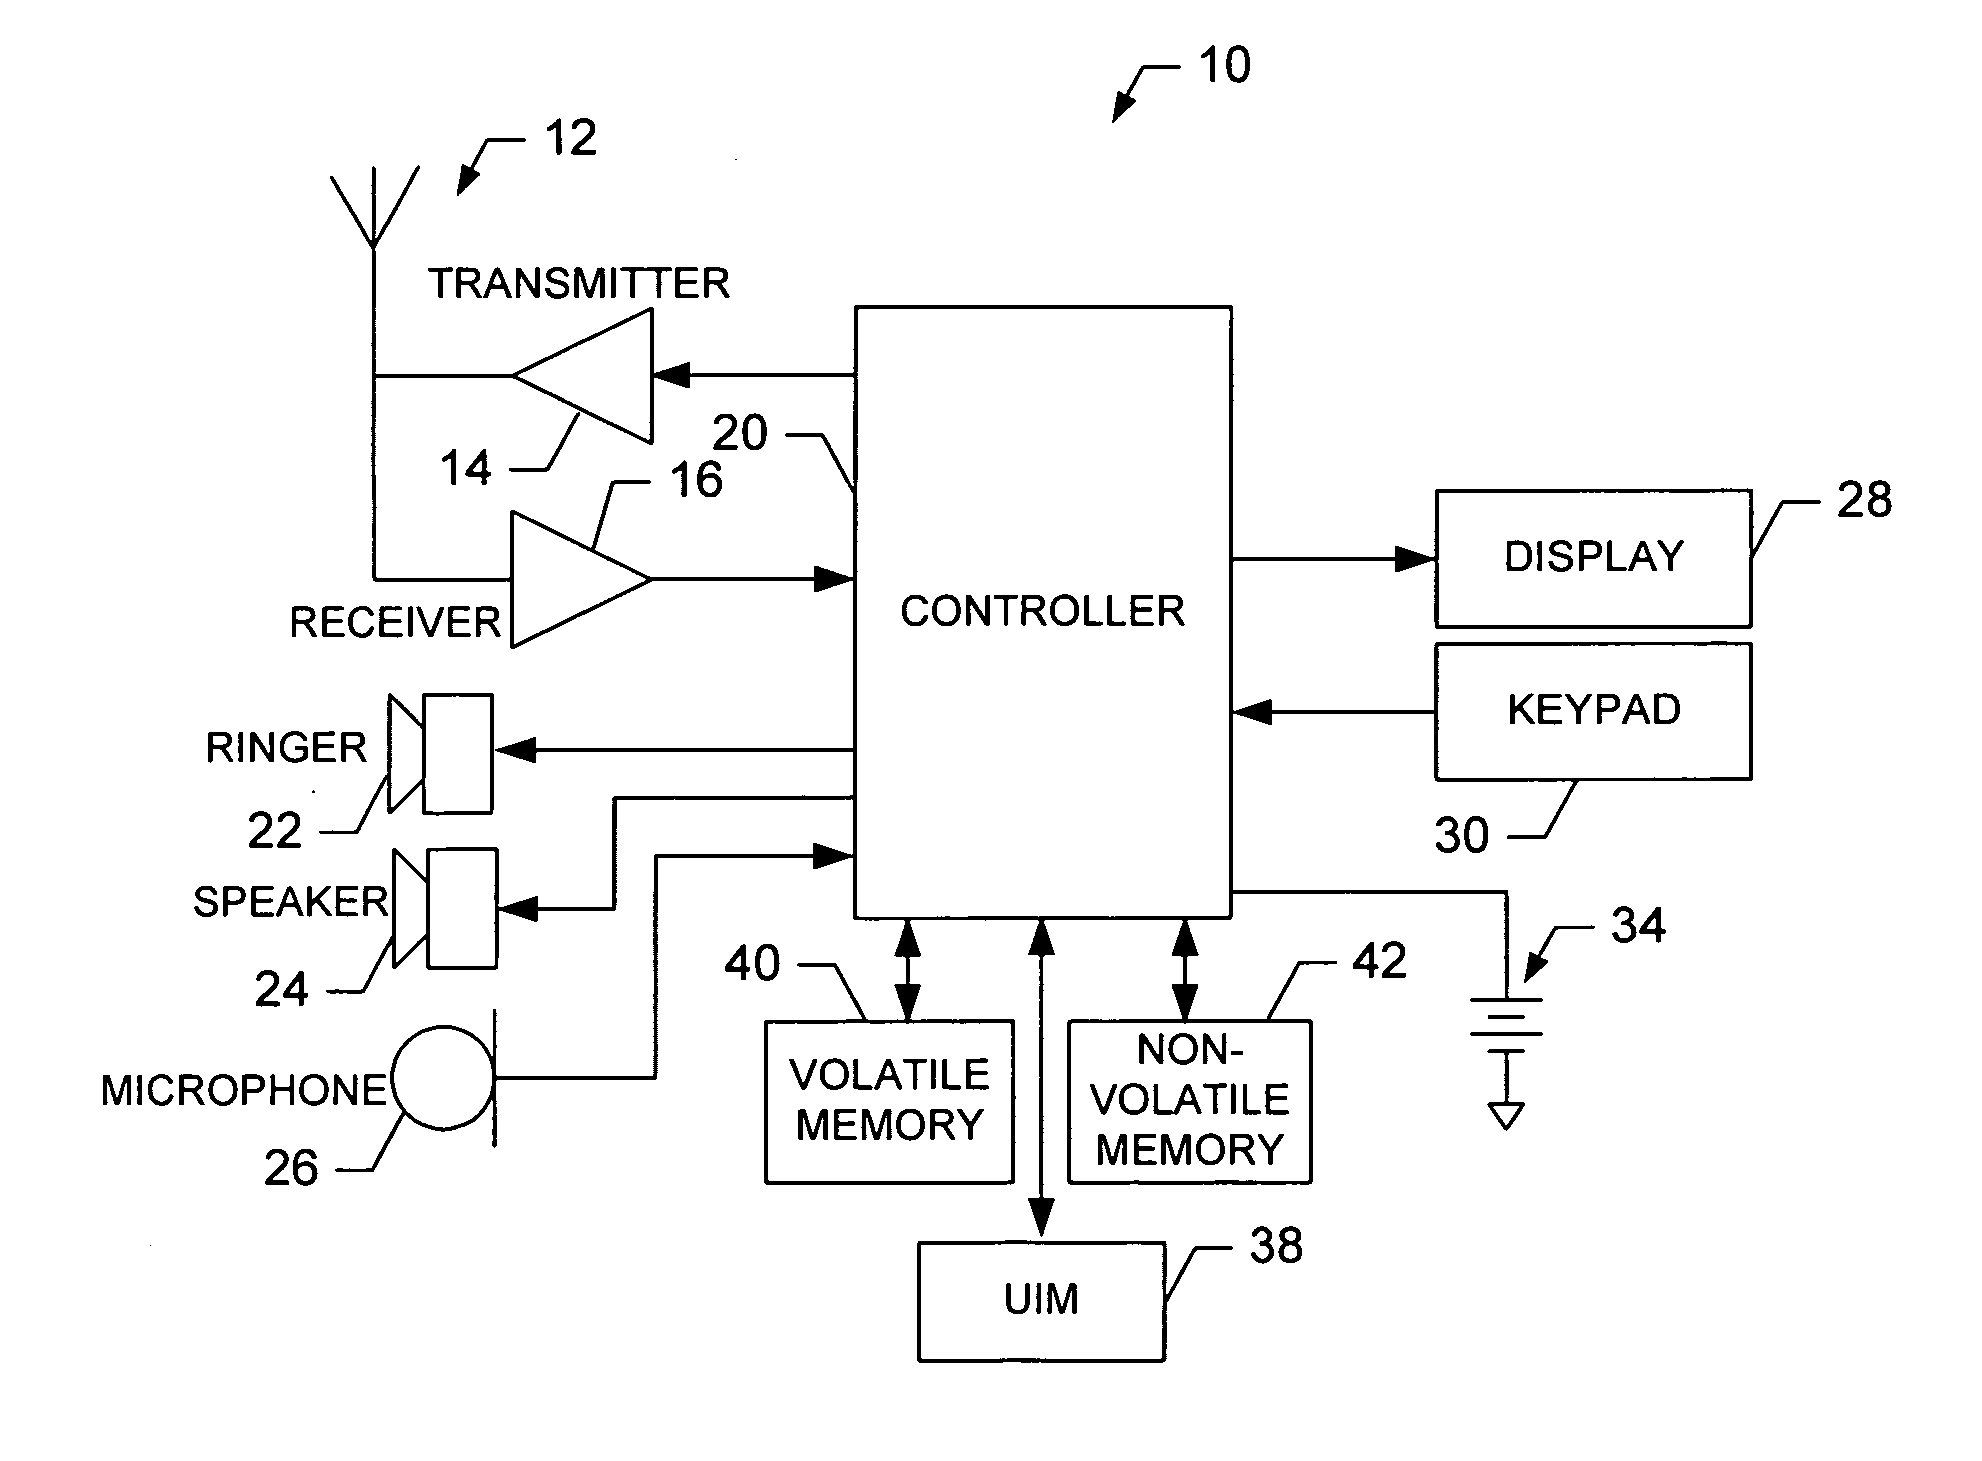 Method, apparatus and computer program product for providing rhythm information from an audio signal